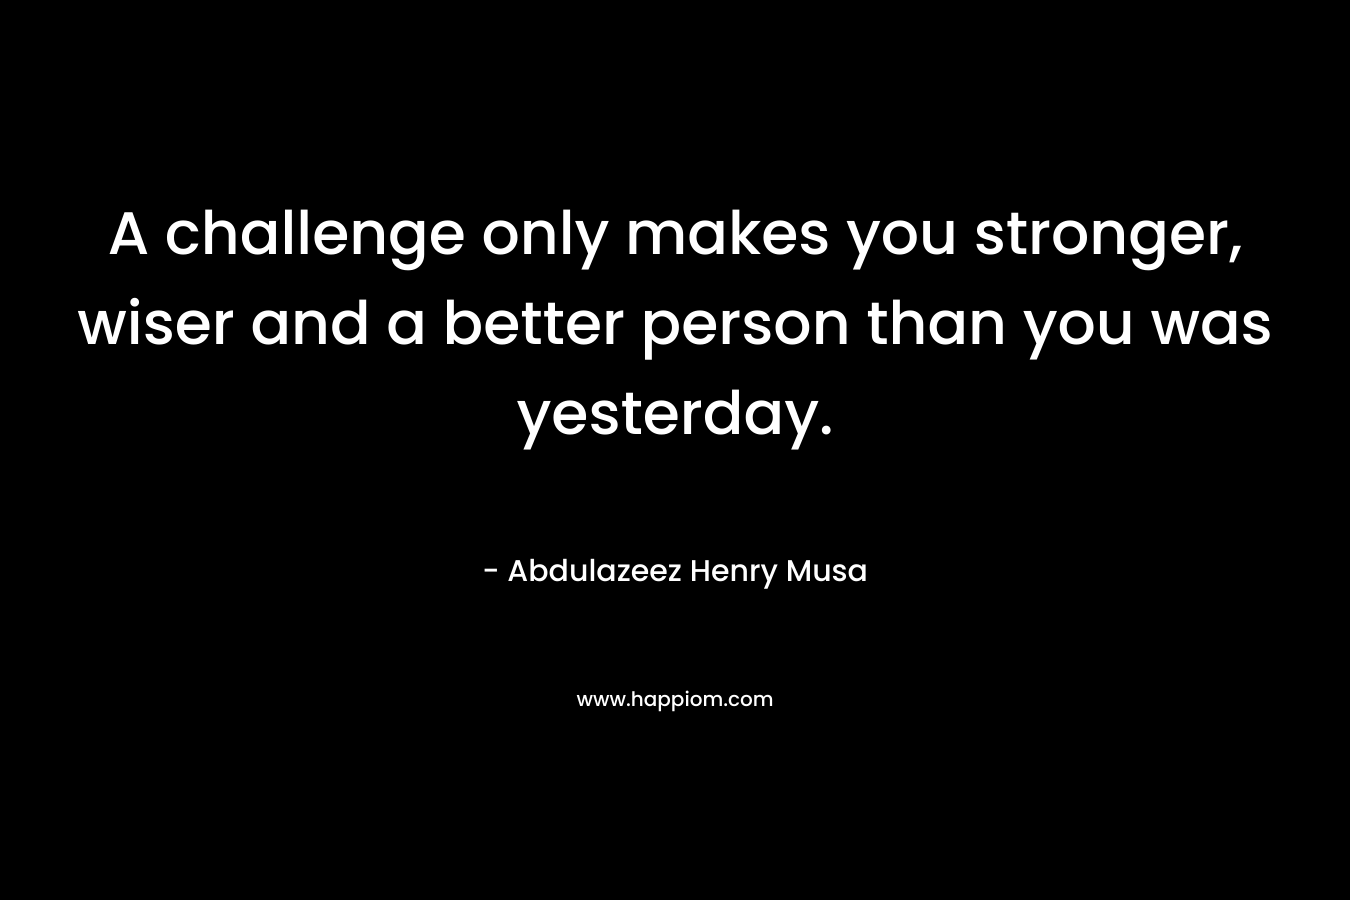 A challenge only makes you stronger, wiser and a better person than you was yesterday.